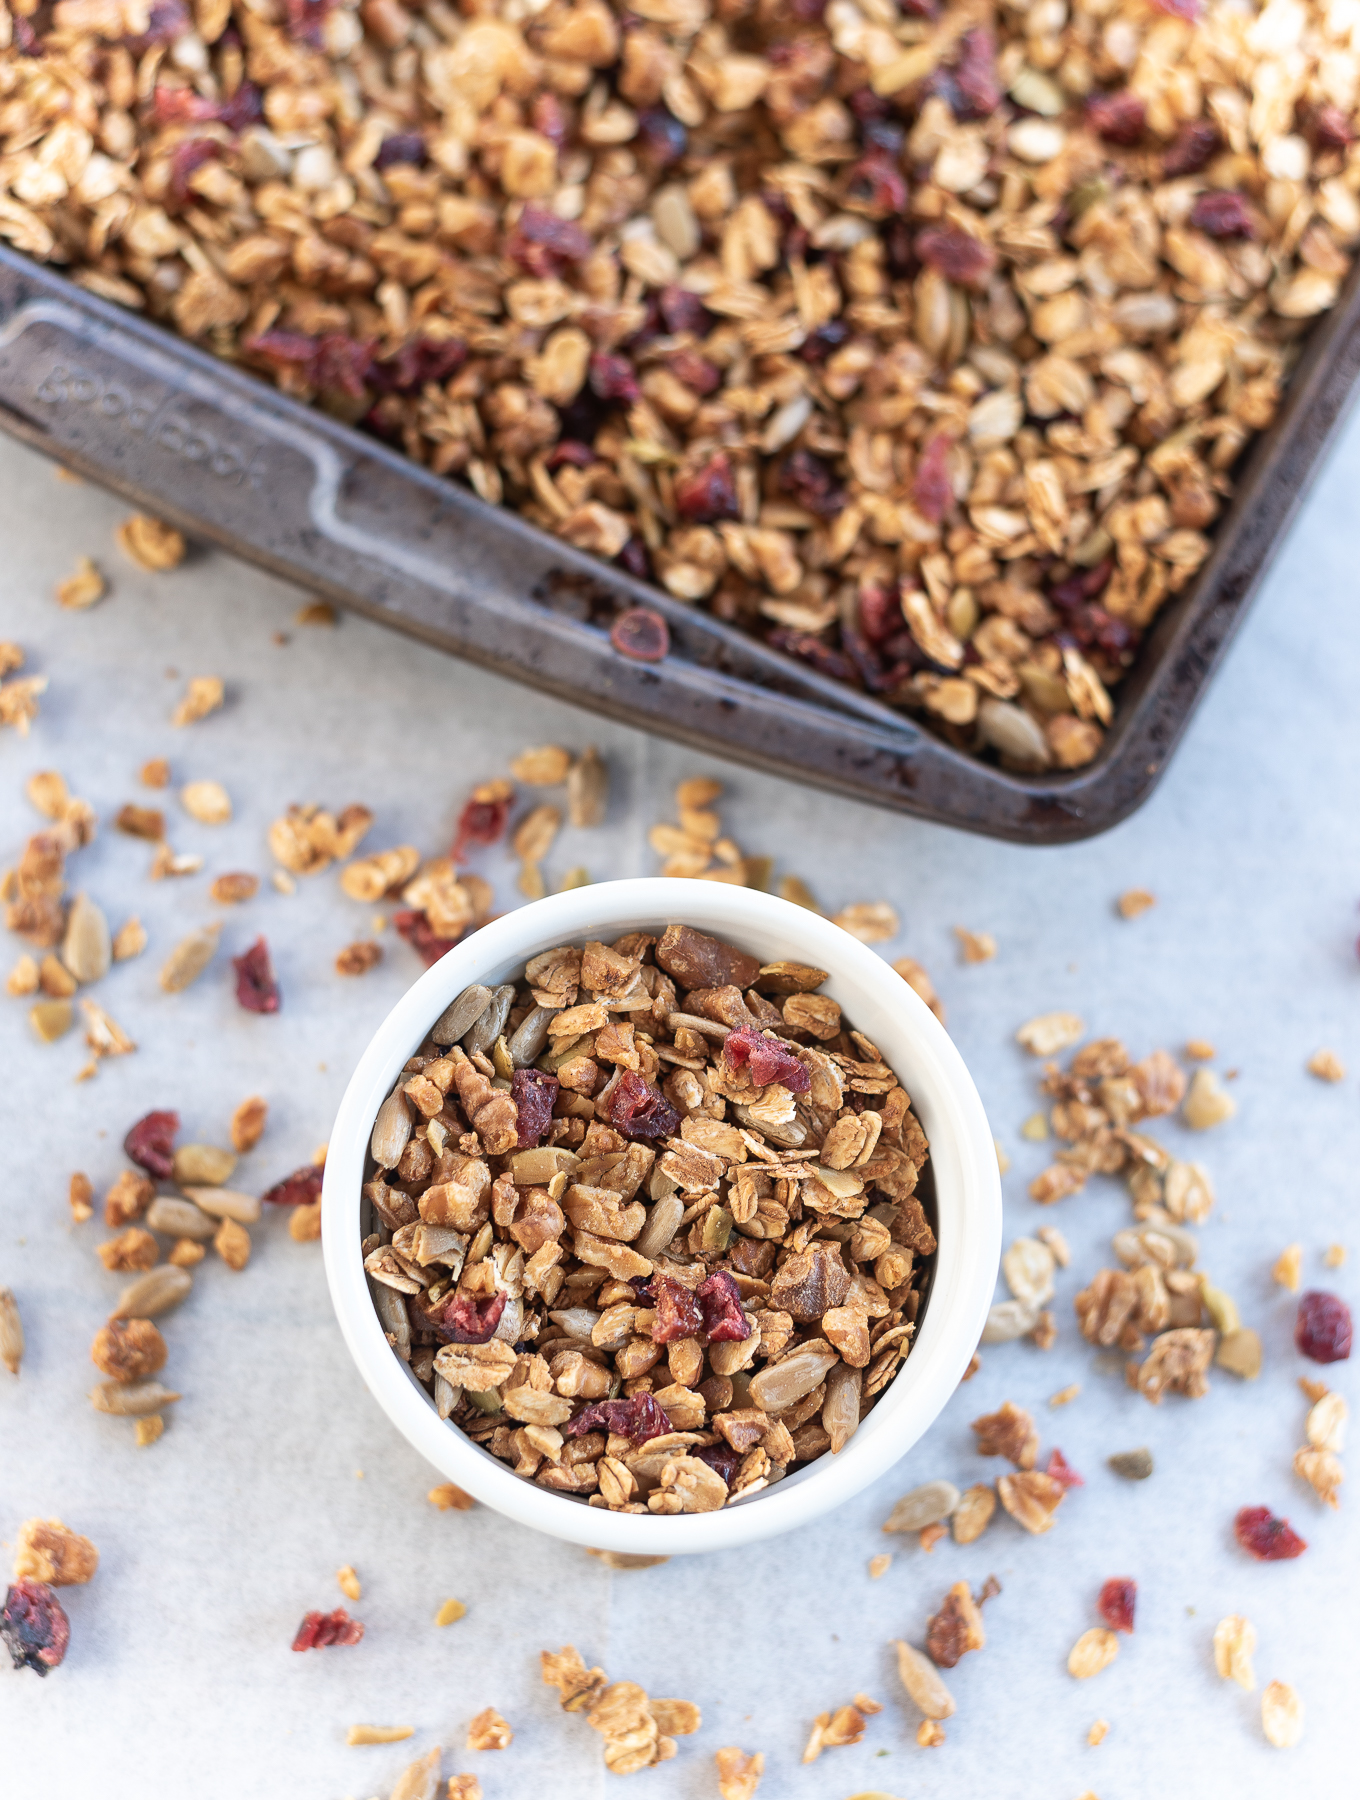 Homemade Granola Recipe - Granola Recipe - Salty and Sweet Granola - Smoothie Bowl Topping with Oats, Walnuts, Pepitas - Oatmeal Topping with Nuts - Easy Granola Recipe - Sheet Pan Granola